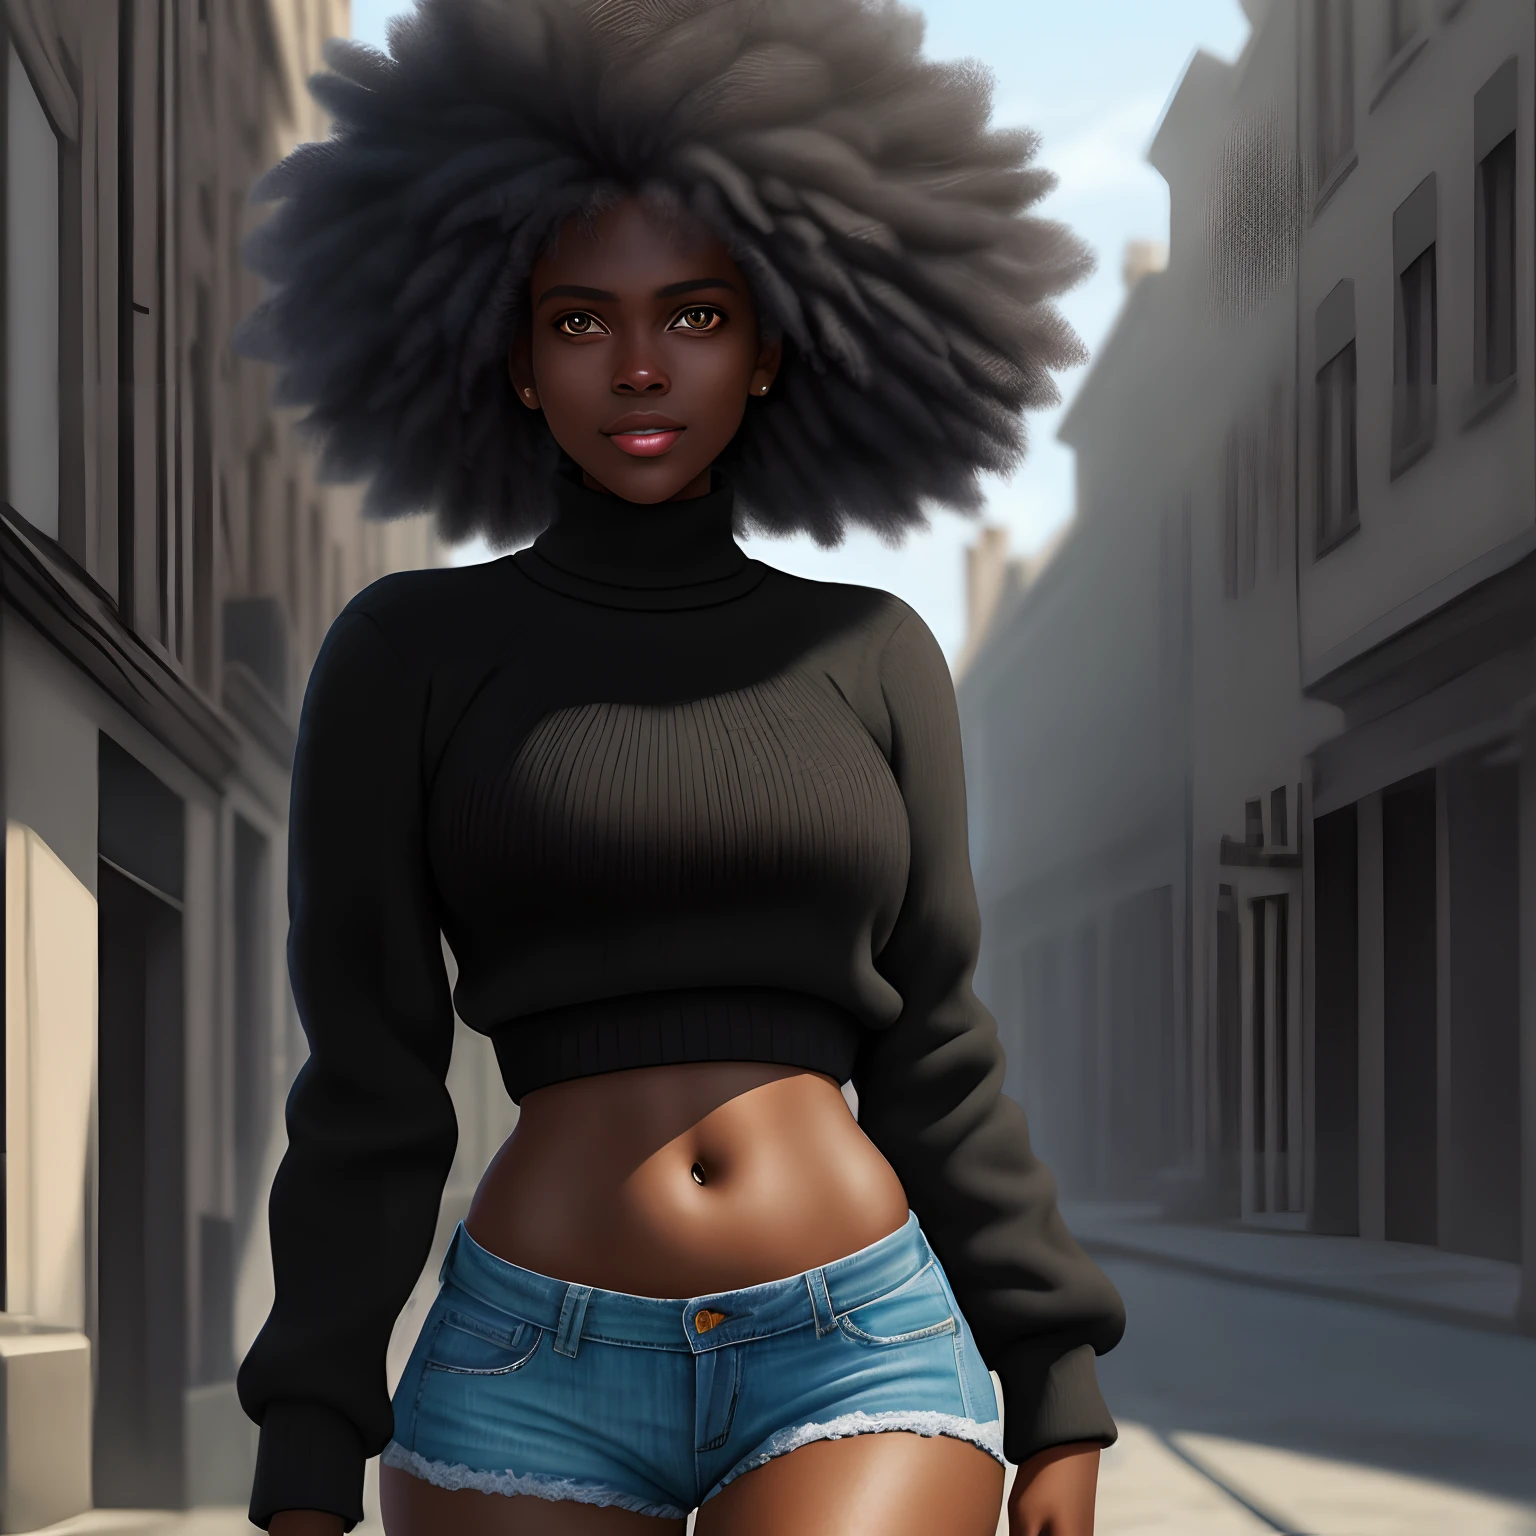 photo realist, beste-Qualit, A dark-skinned black woman wearing a detailed green turtleneck sweater with an intricate black jacket with very short denim shorts at a street , Asymmetrical afro haircut, ventre, sourire, bosseler, Ultra crazy dedications, extreme intricate details, Bumpy gap, cul autour de HDR, natural light, volumetric shading, pose dynamique, hyper-realistic, realistic lighting, ombres dramatiques, Mise au point rigide, high contrast, ombres dramatiques de perspective dramatique,